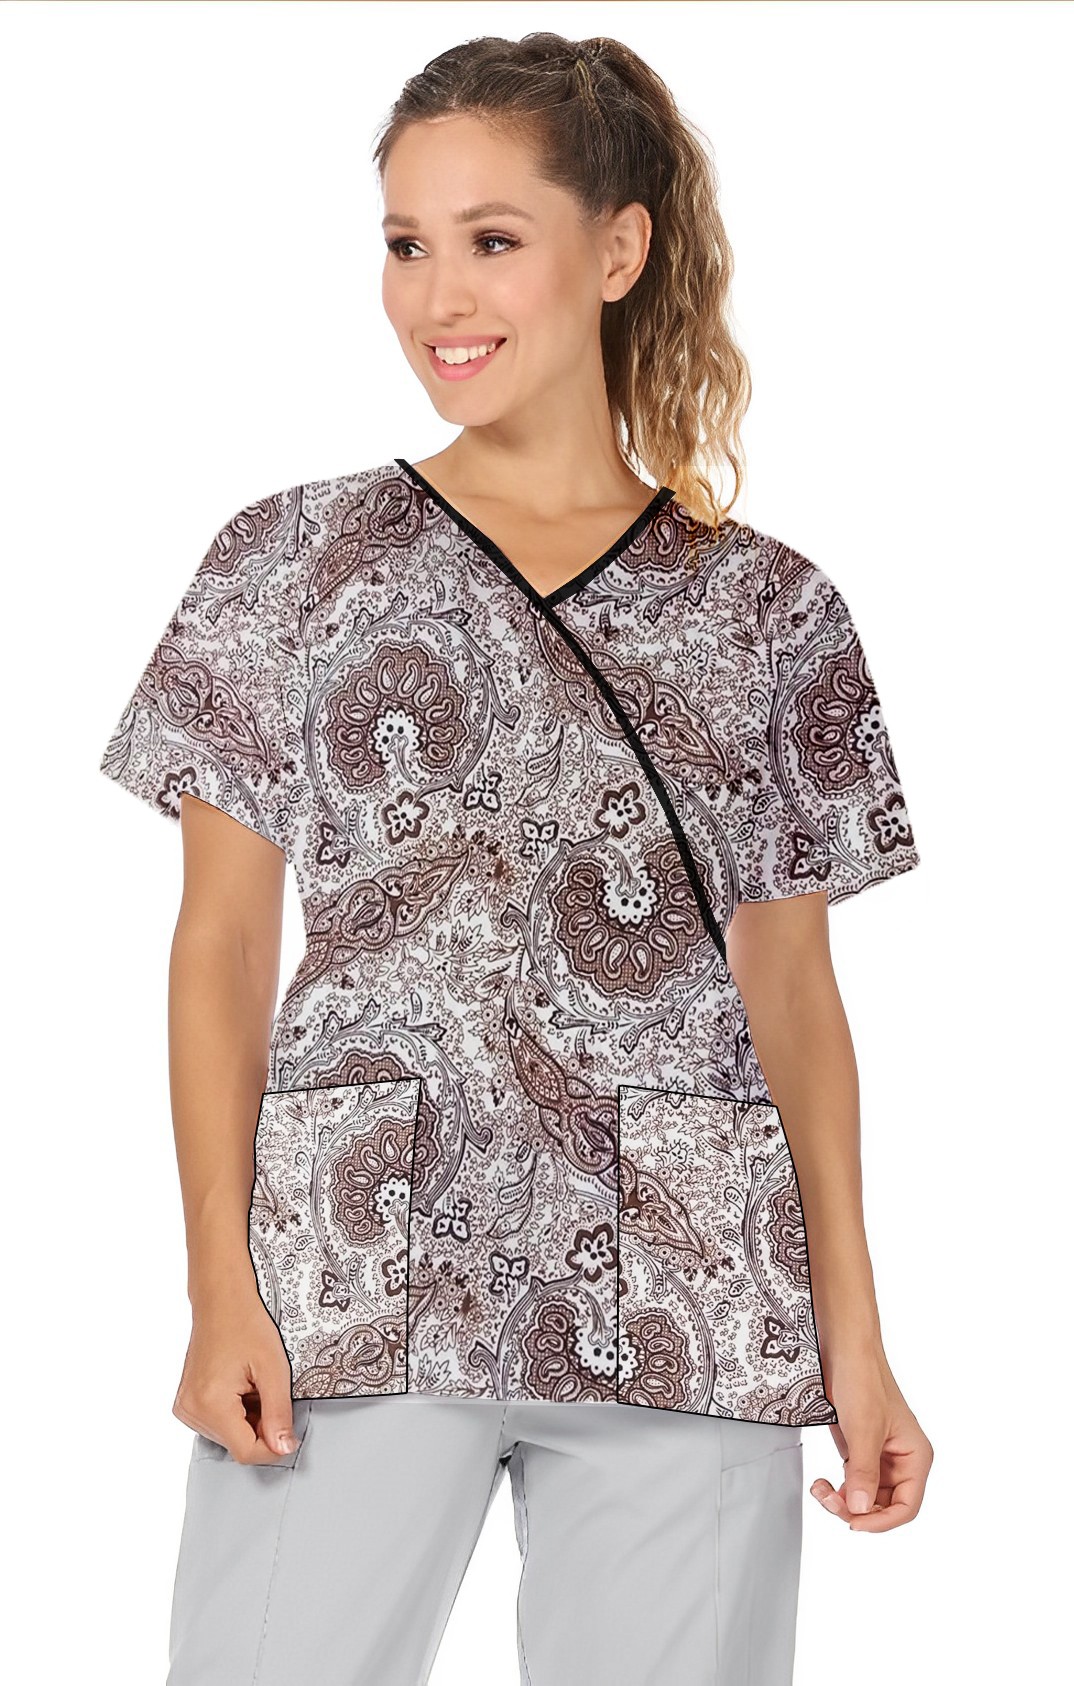 Top mock wrap 3 pocket half sleeve in Brown Paisley Print with Black Piping